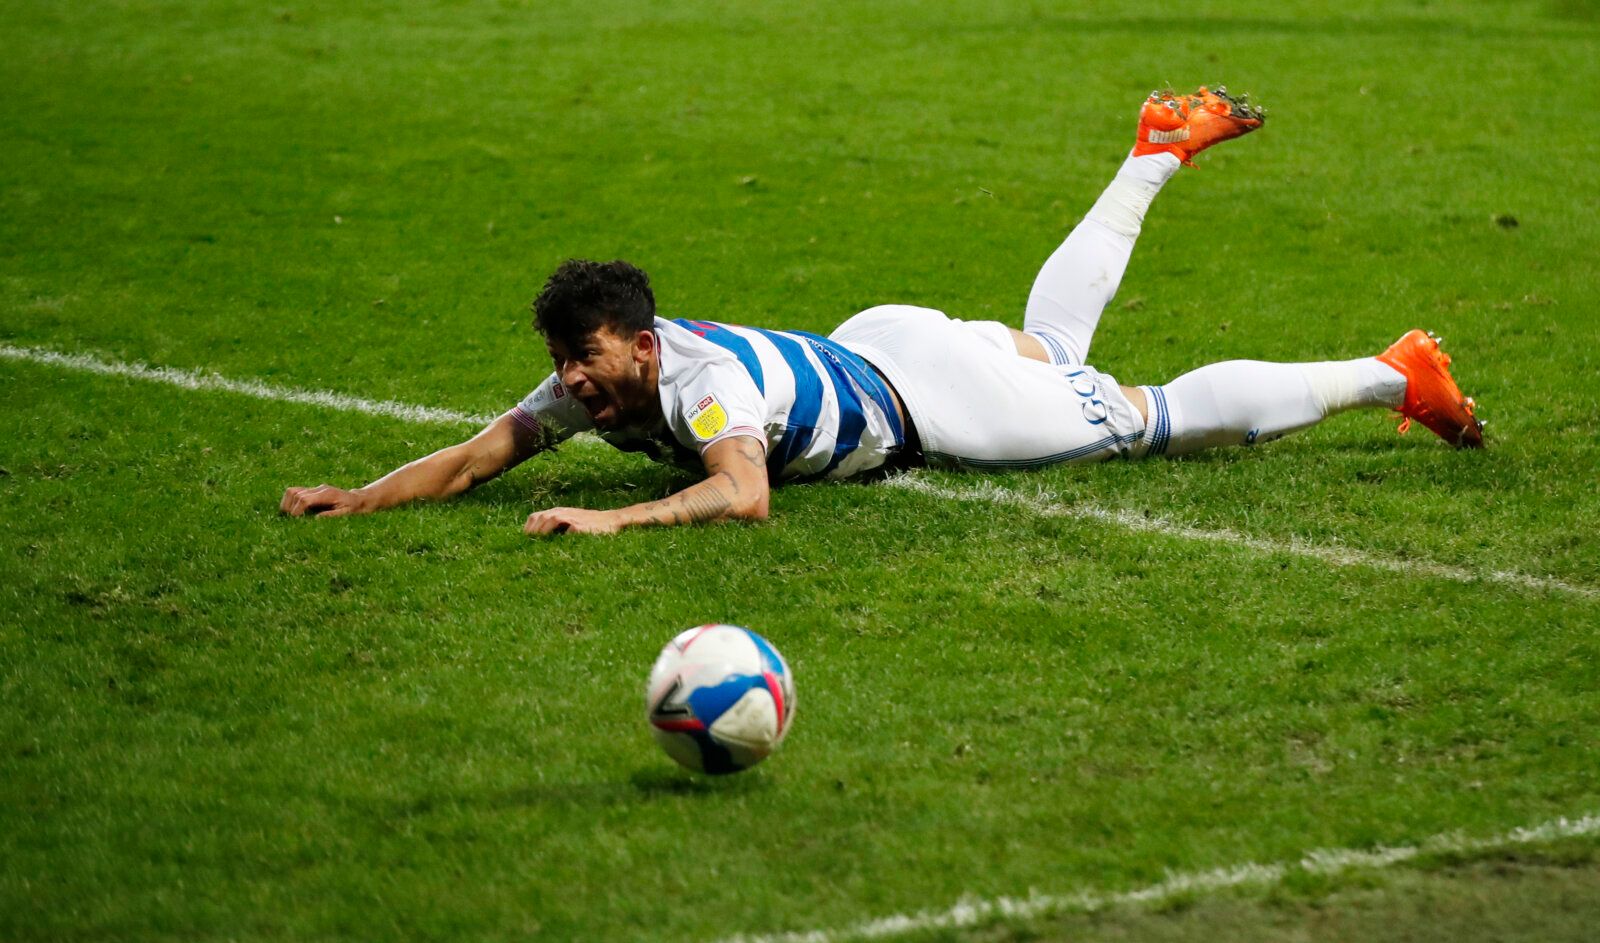 Soccer Football - Championship - Queens Park Rangers v Watford - Loftus Road, London, Britain - November 21, 2020 QPR's Macauley Bonne reacts Action Images/Peter Cziborra EDITORIAL USE ONLY. No use with unauthorized audio, video, data, fixture lists, club/league logos or 'live' services. Online in-match use limited to 75 images, no video emulation. No use in betting, games or single club /league/player publications.  Please contact your account representative for further details.